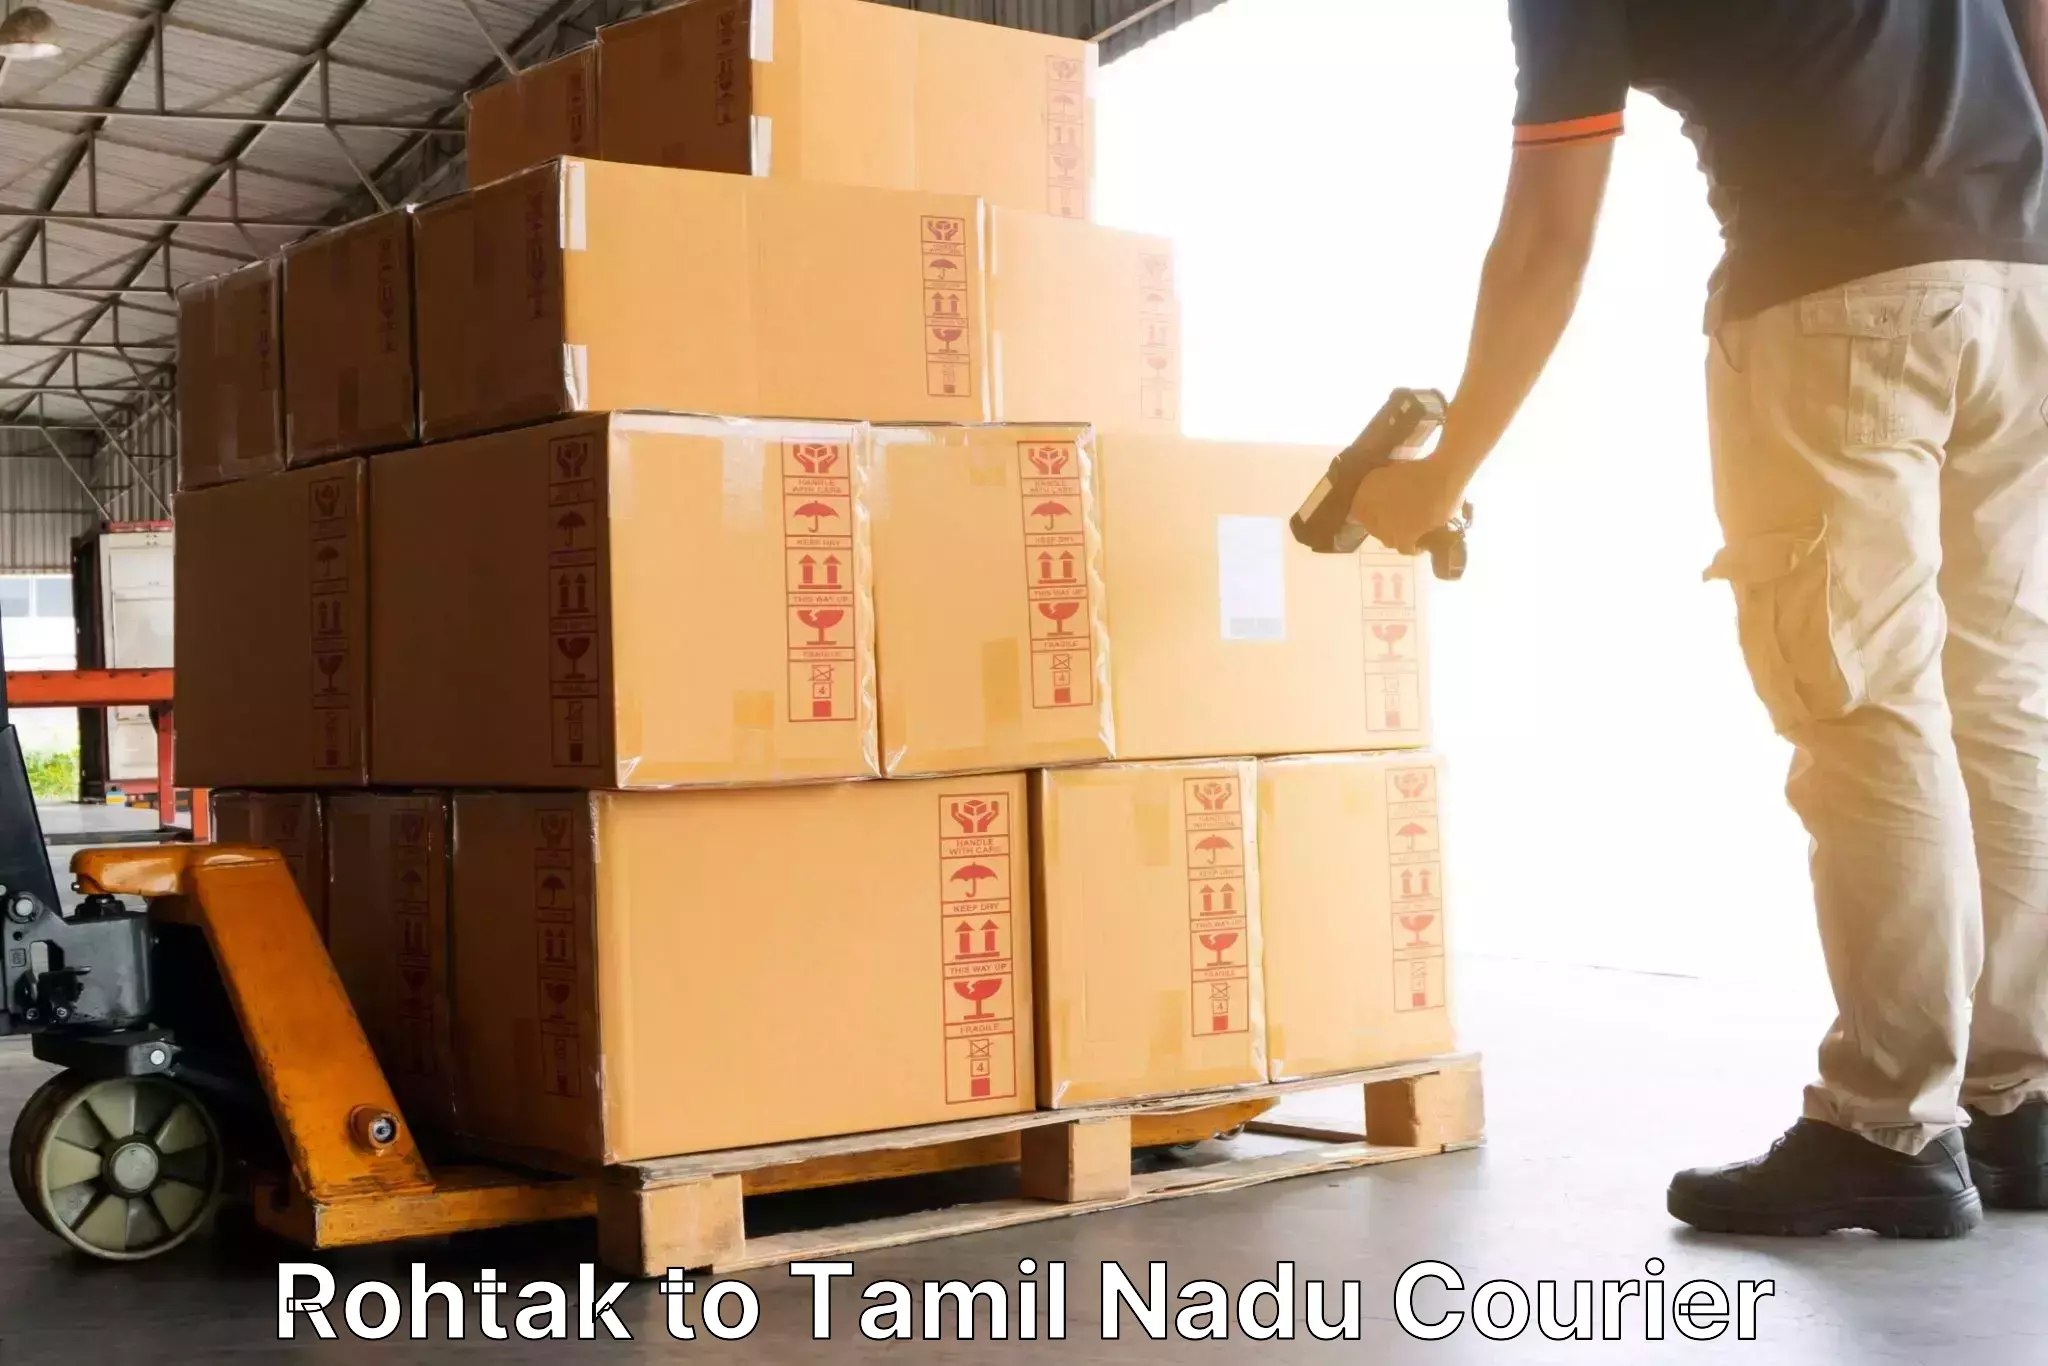 Efficient order fulfillment Rohtak to Saveetha Institute of Medical and Technical Sciences Chennai